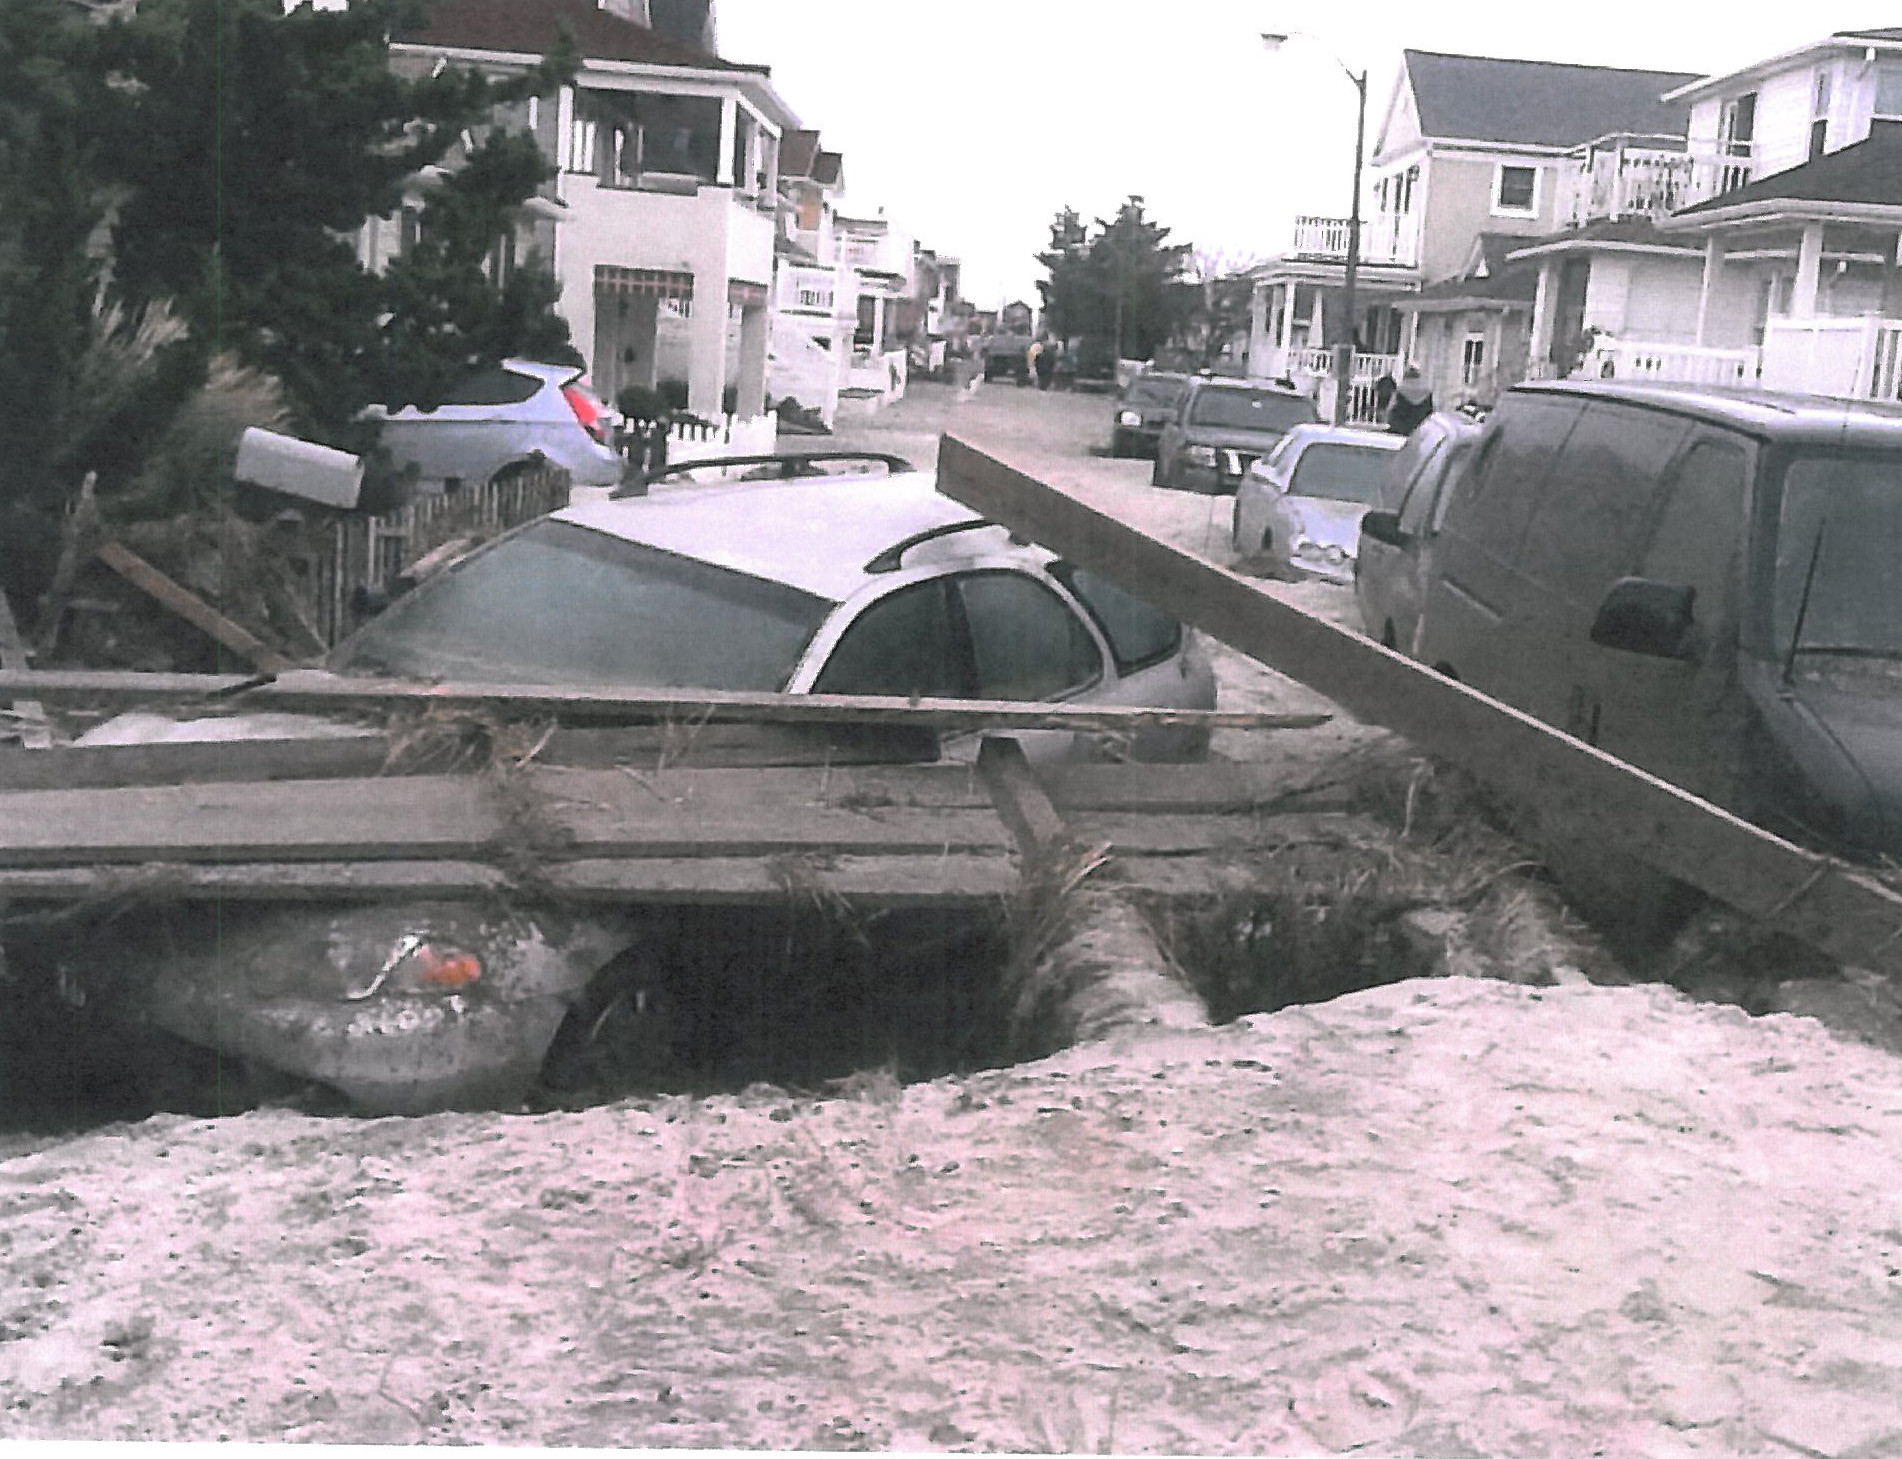 Hurricane Sandy devastated Michigan Street in Long Beach, where Bob Kaible and his wife, Deborah Raimey, owned a rental property. A false engineering report claimed that damage to their property resulted not from flooding, but earth movement.